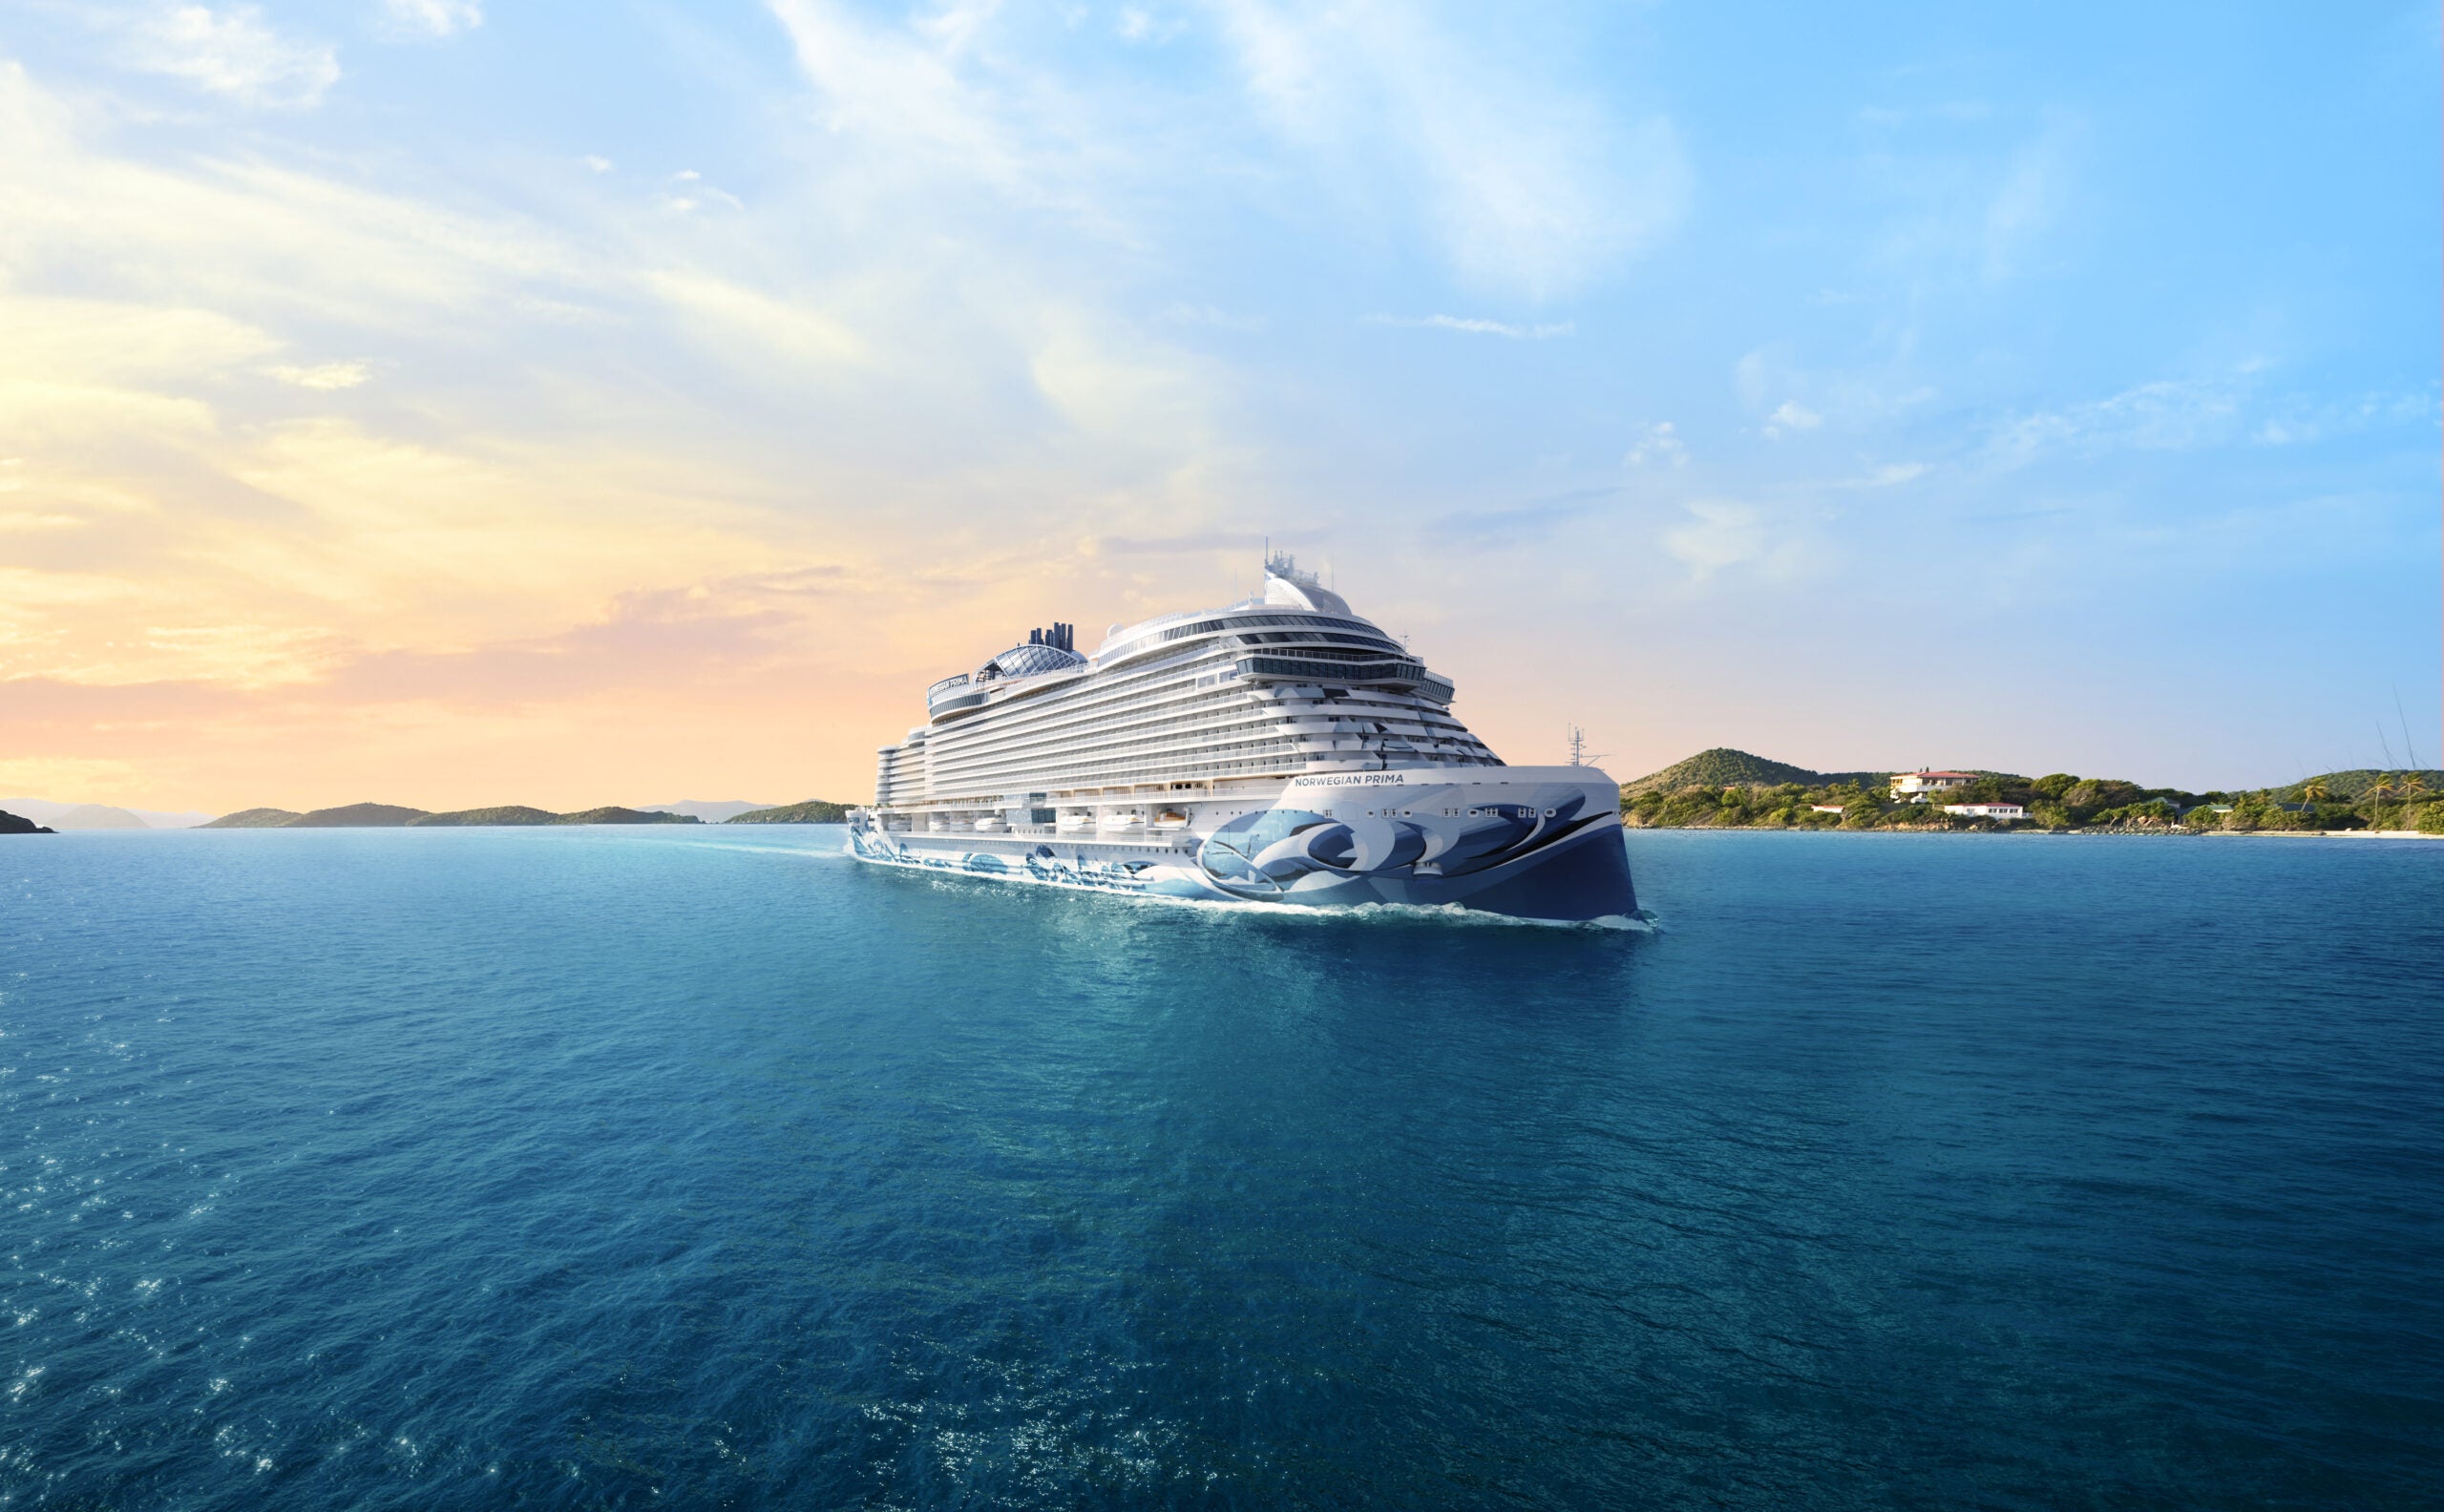 Meet the ultimate cruise cocktail: NCL’s new Prima ship